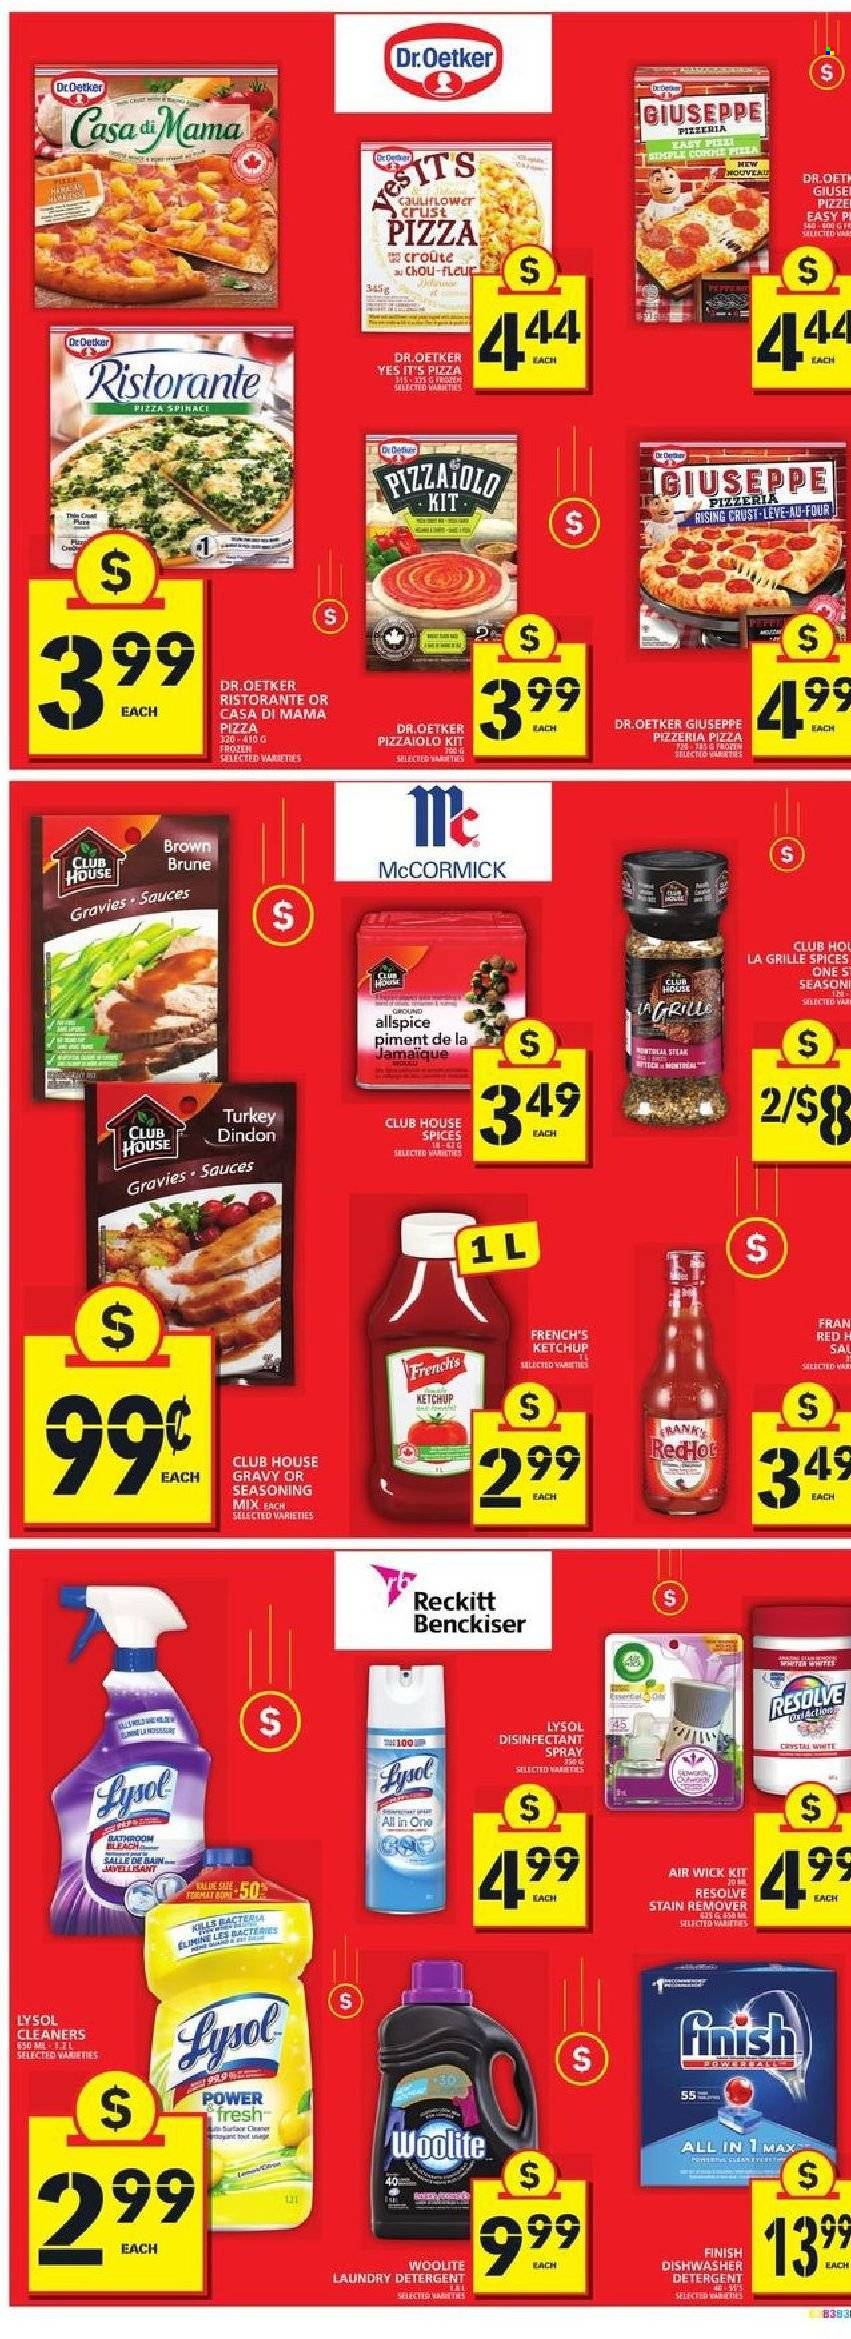 thumbnail - Food Basics Flyer - September 16, 2021 - September 22, 2021 - Sales products - pizza, Dr. Oetker, spice, bleach, stain remover, Lysol, Woolite, laundry detergent, antibacterial spray, Air Wick, detergent, ketchup, desinfection. Page 3.